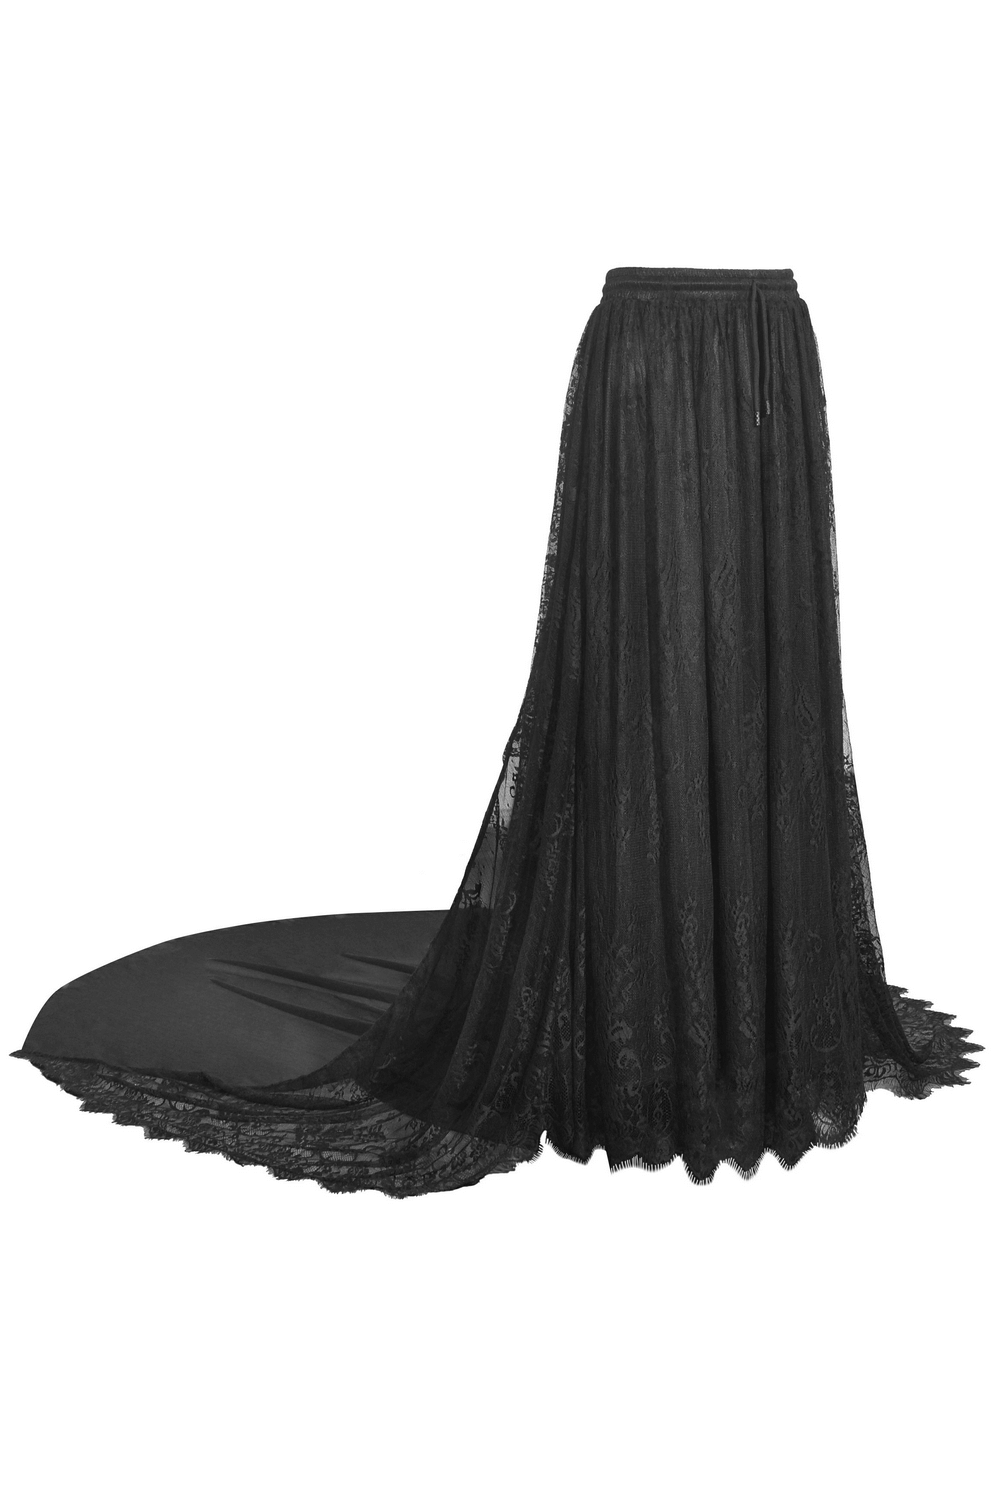 Elegance Romance Embroidered Maxi Lace Skirt with Train